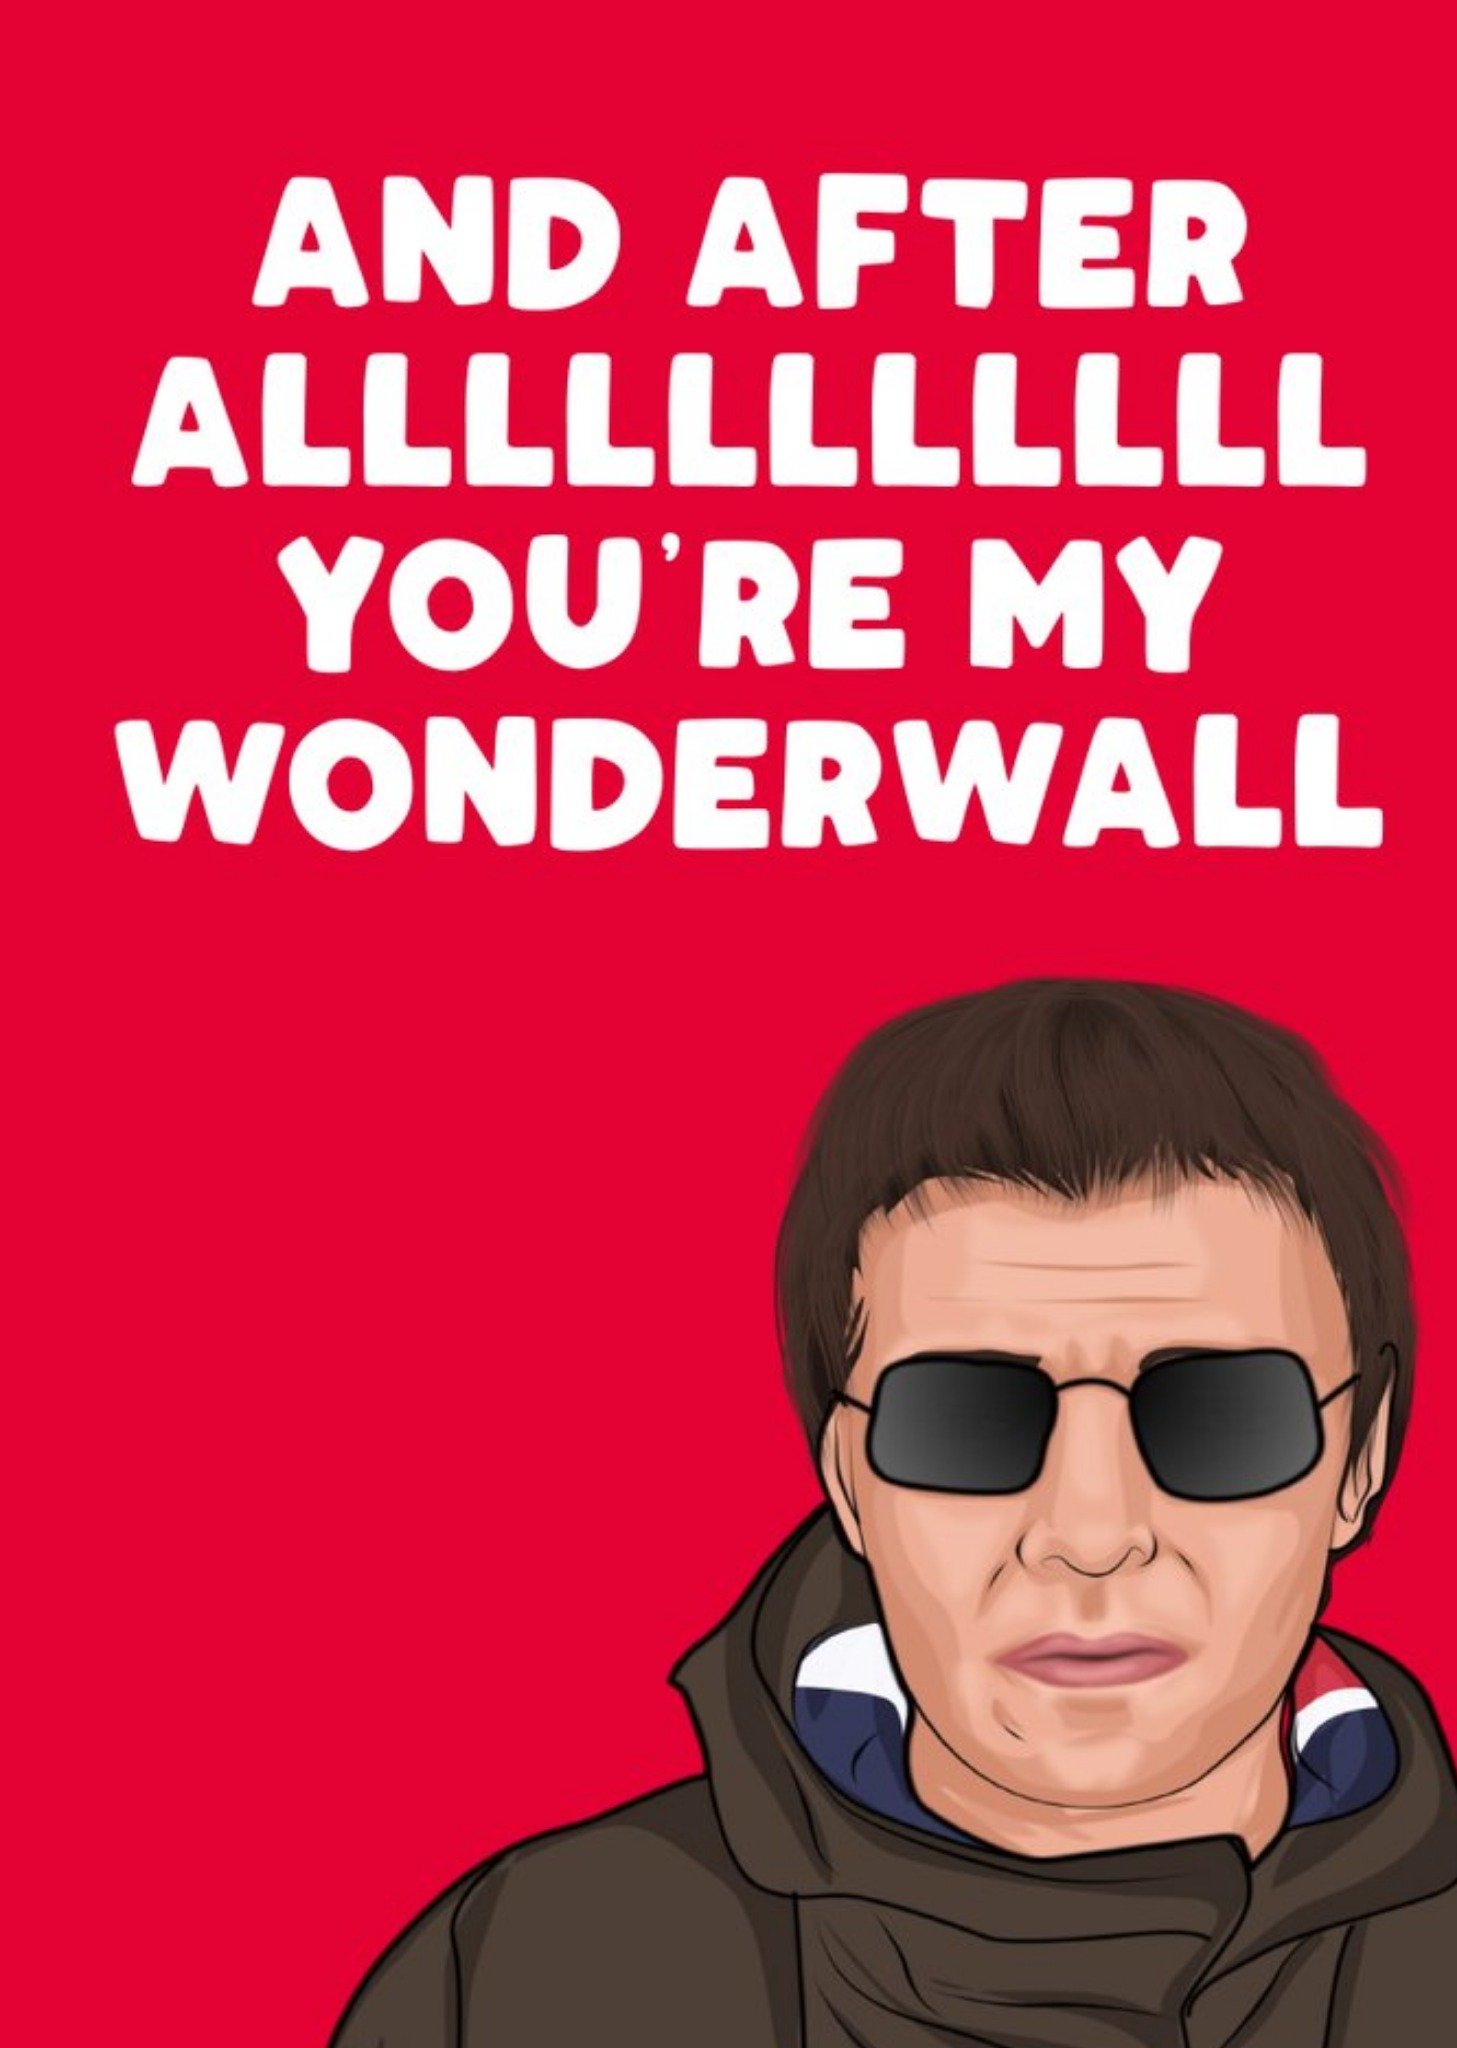 Filthy Sentiments And After All You're My Wonderwall Spoof Card, Large